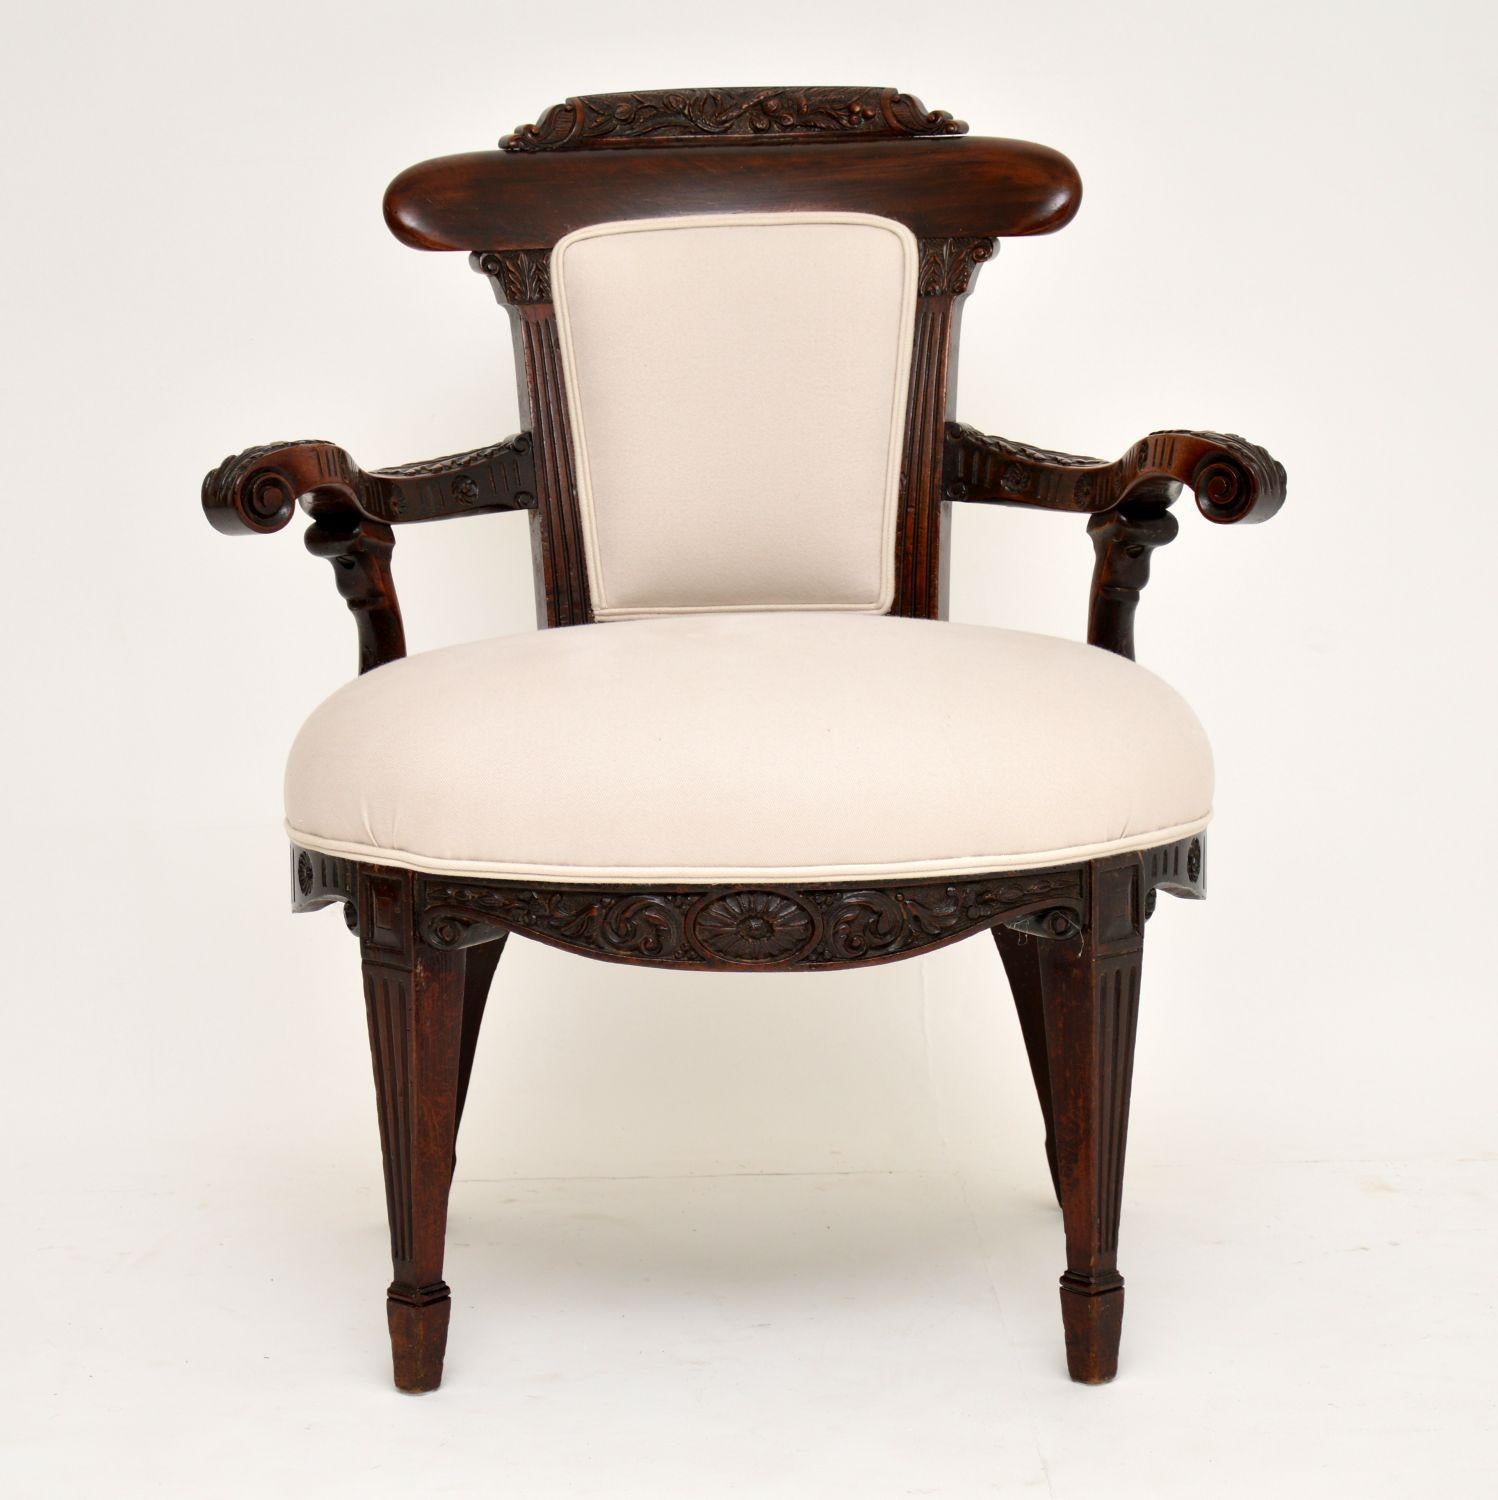 This antique Edwardian mahogany armchair dating from the 1890-1910 period is very high quality and has wonderful shaping all over. It has very generous proportions and is carved all over. There is a carved floral panel on the top with capitals below